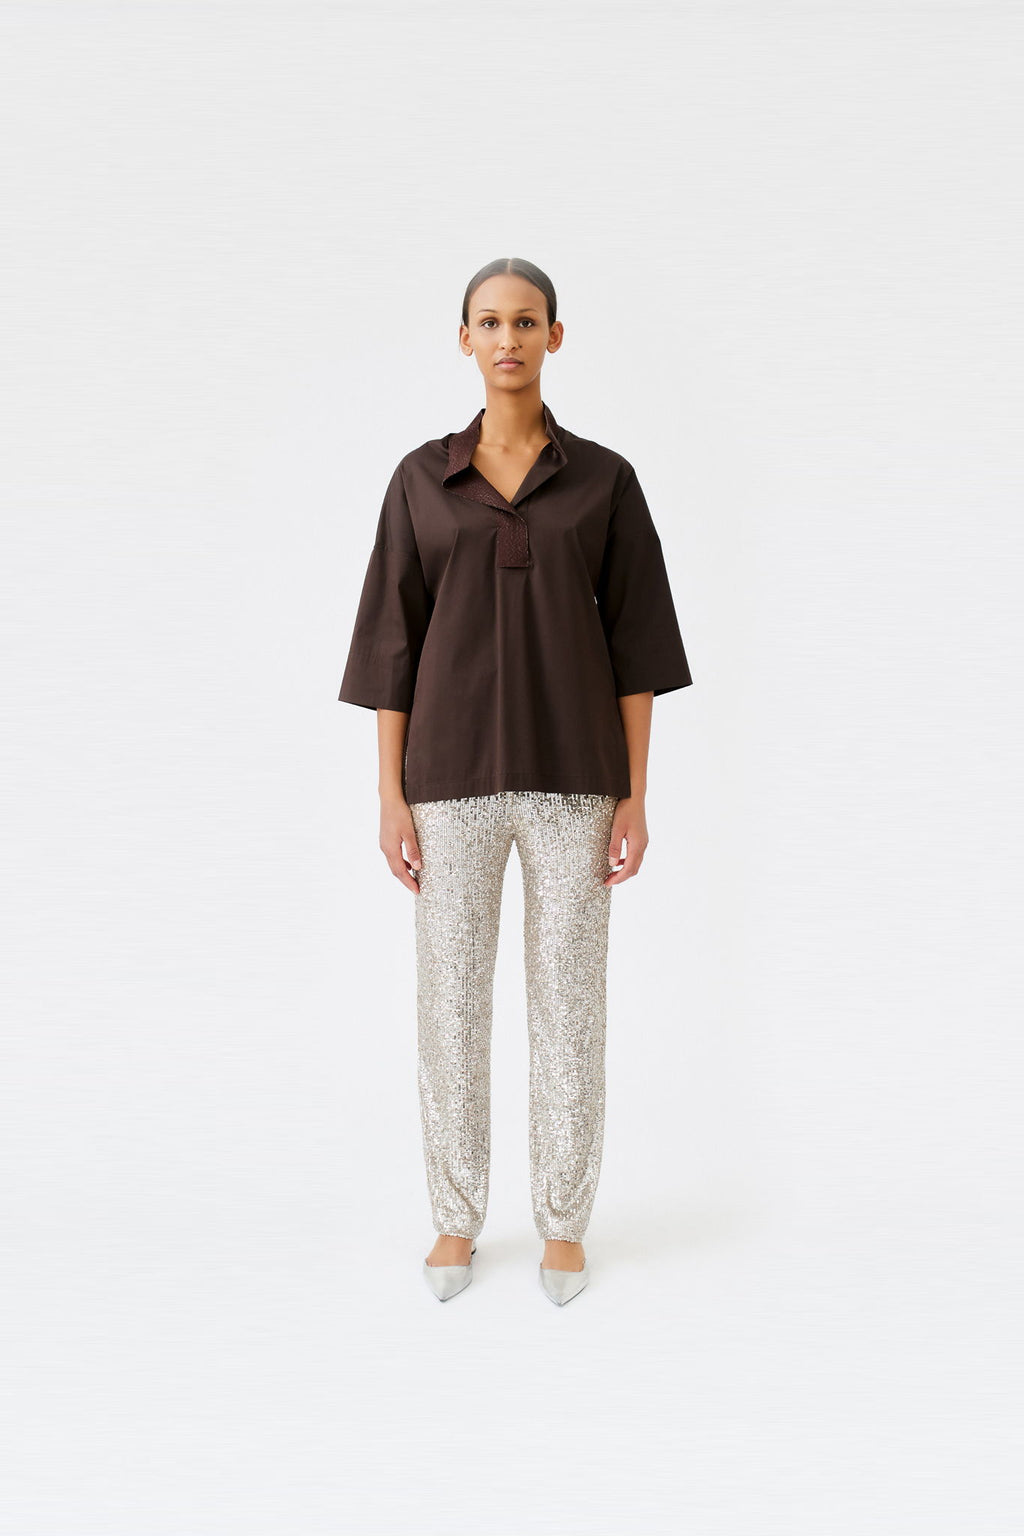 wingate collection tayne mocha top on female model with silver slippers video